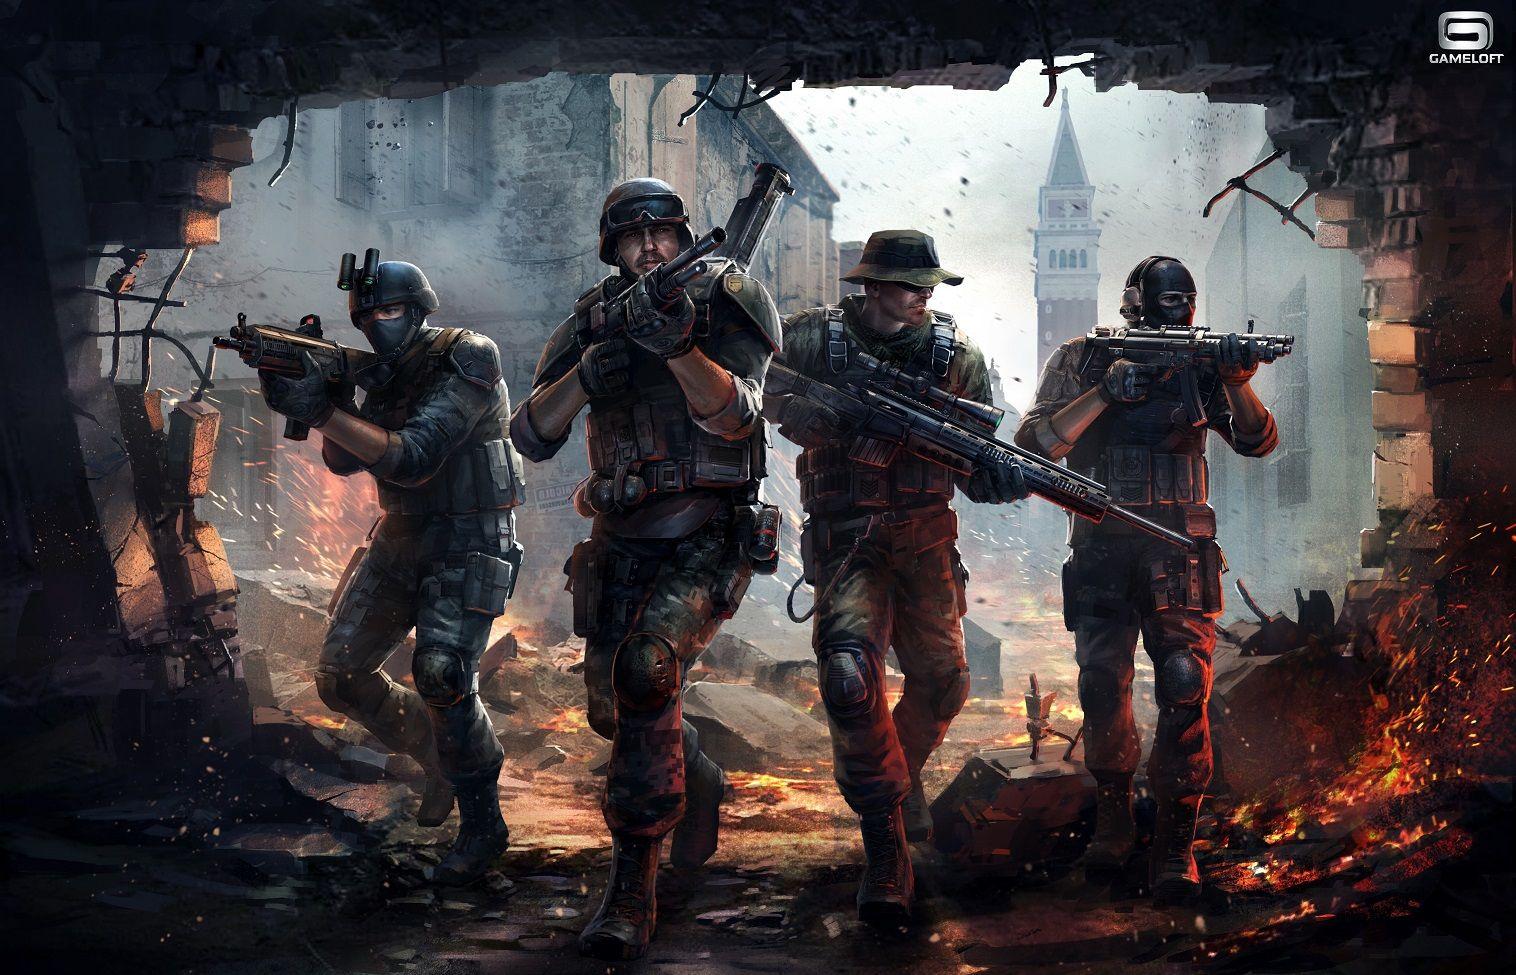 Gameloft's 'Modern Combat 5: Blackout' set to be released July 24th